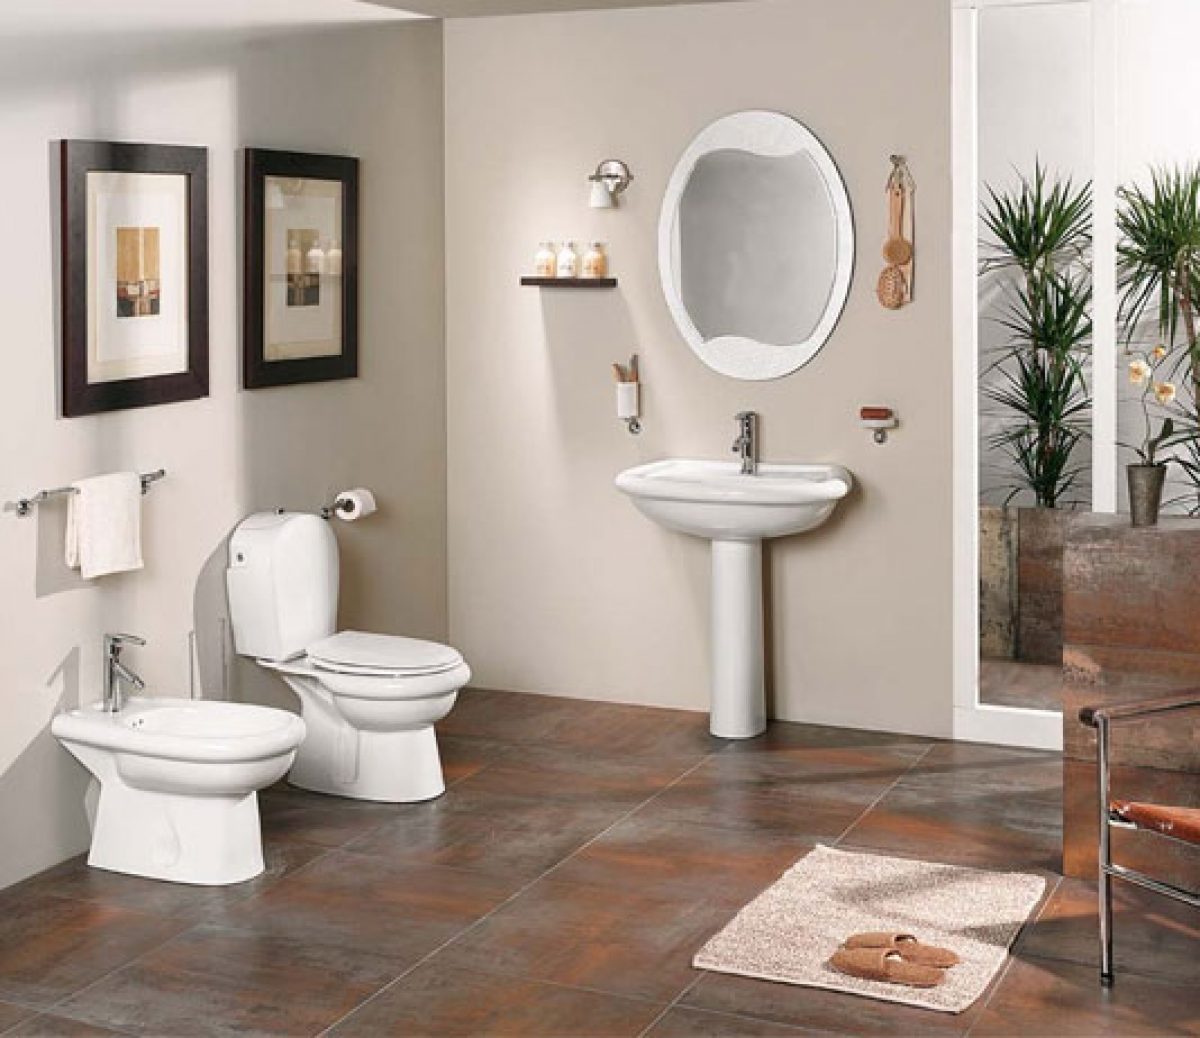 Bathroom Fittings Market 5-5: Size, Share, Price Trends